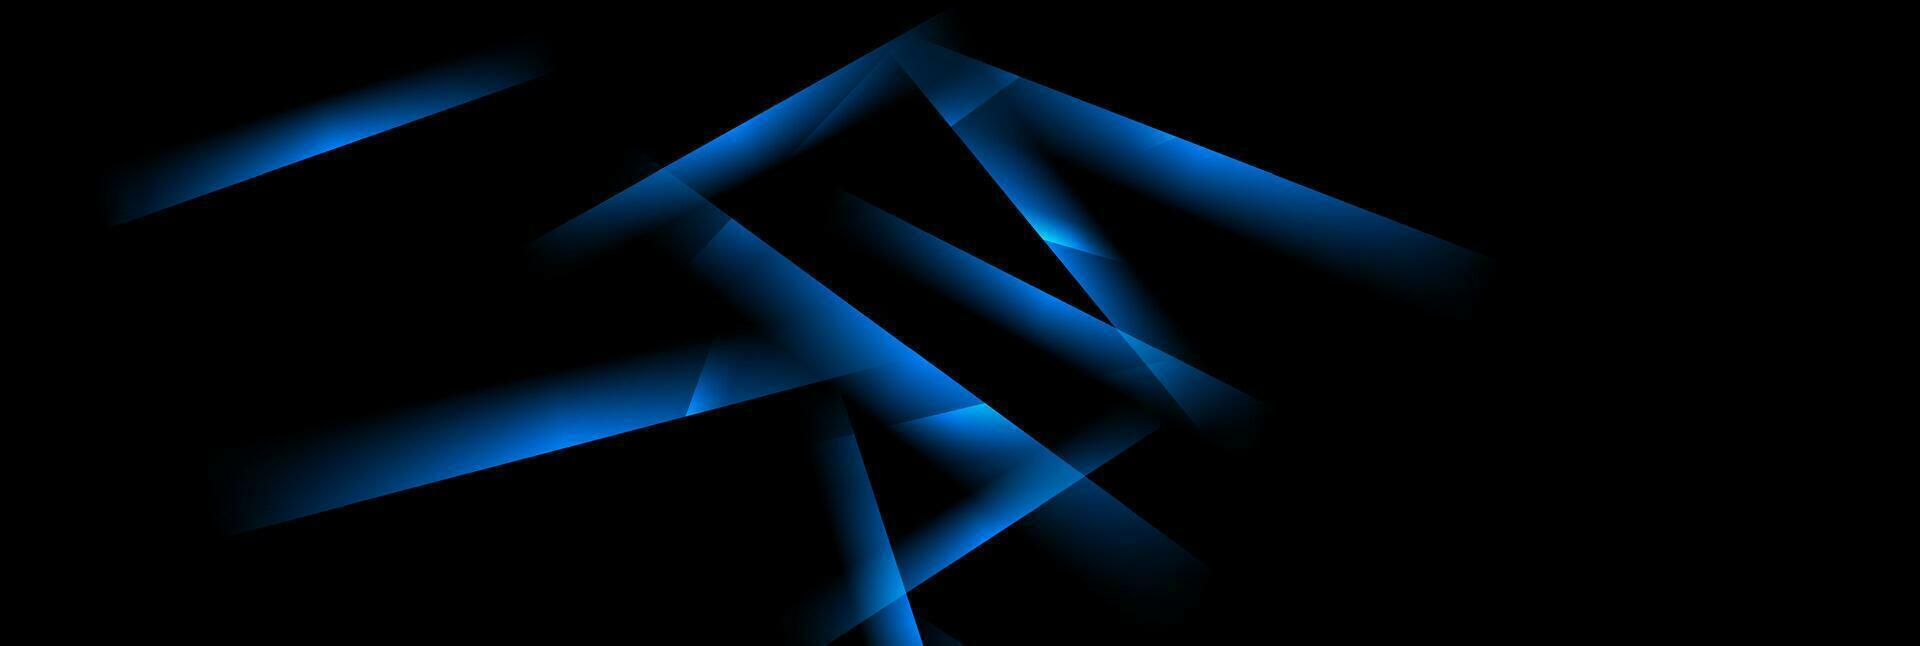 Bright blue abstract glossy stripes on black background vector